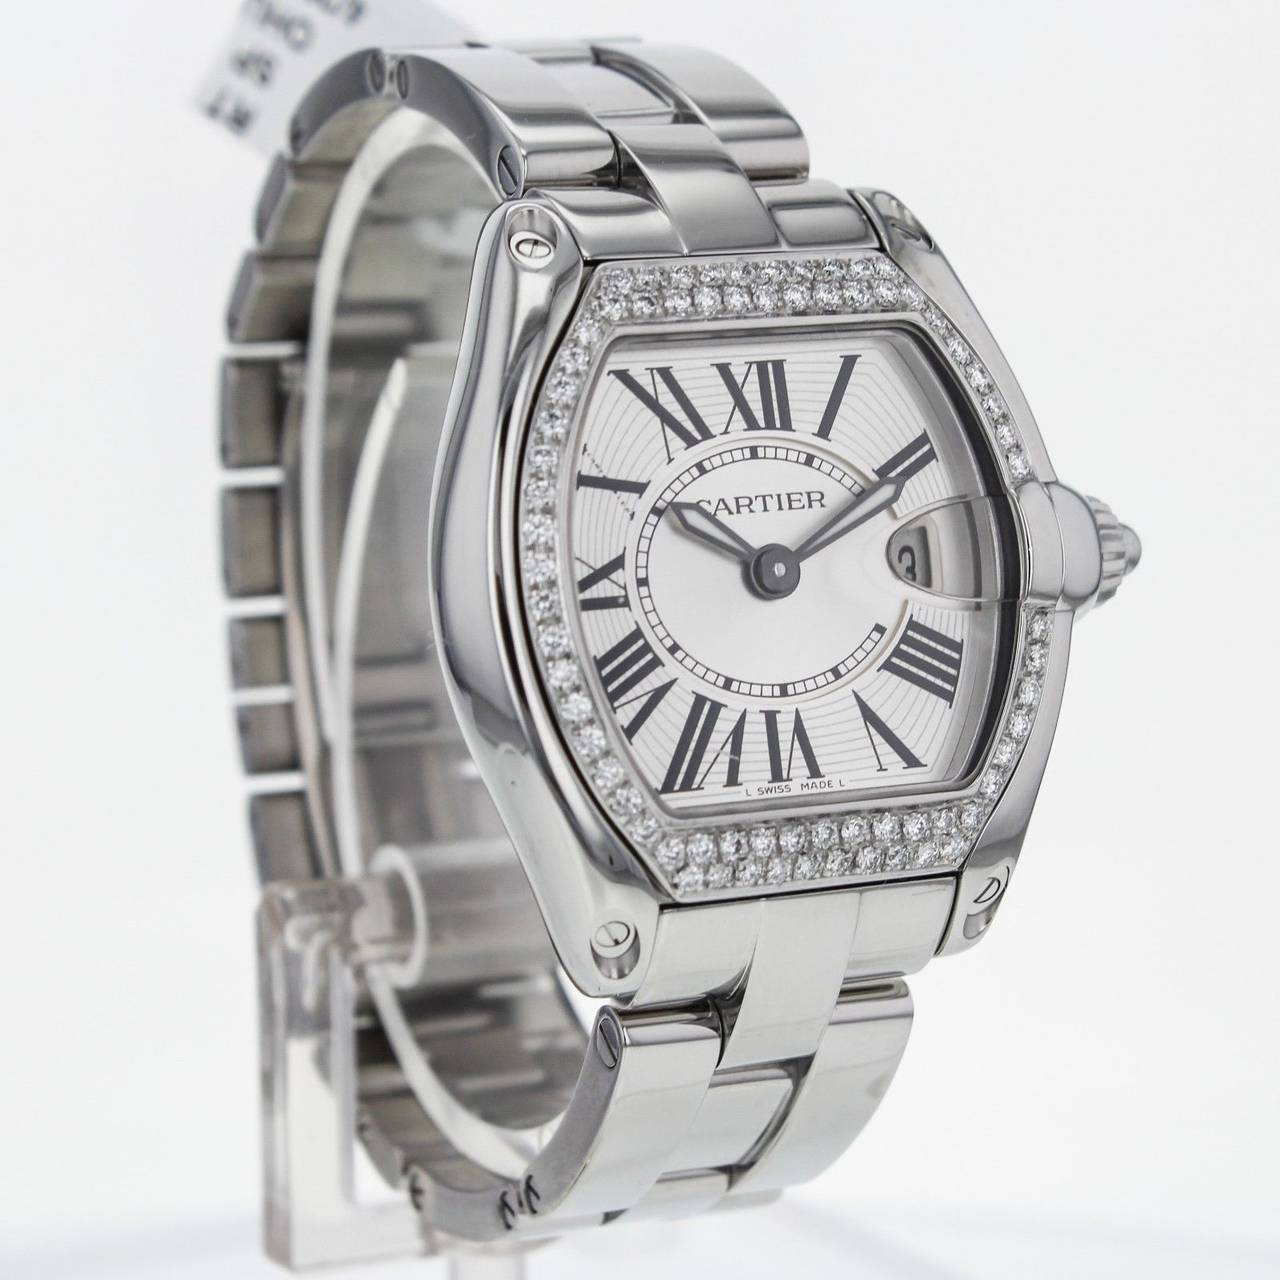 Ladies Cartier Roadster in Stainless Steel with Diamond Bezel, Quartz Watch. Manufacturer's papers and box not included.

Previously owned, excellent condition with expected wear. Cleaned and serviced.

36mm x 30mm in its case size and 9mm